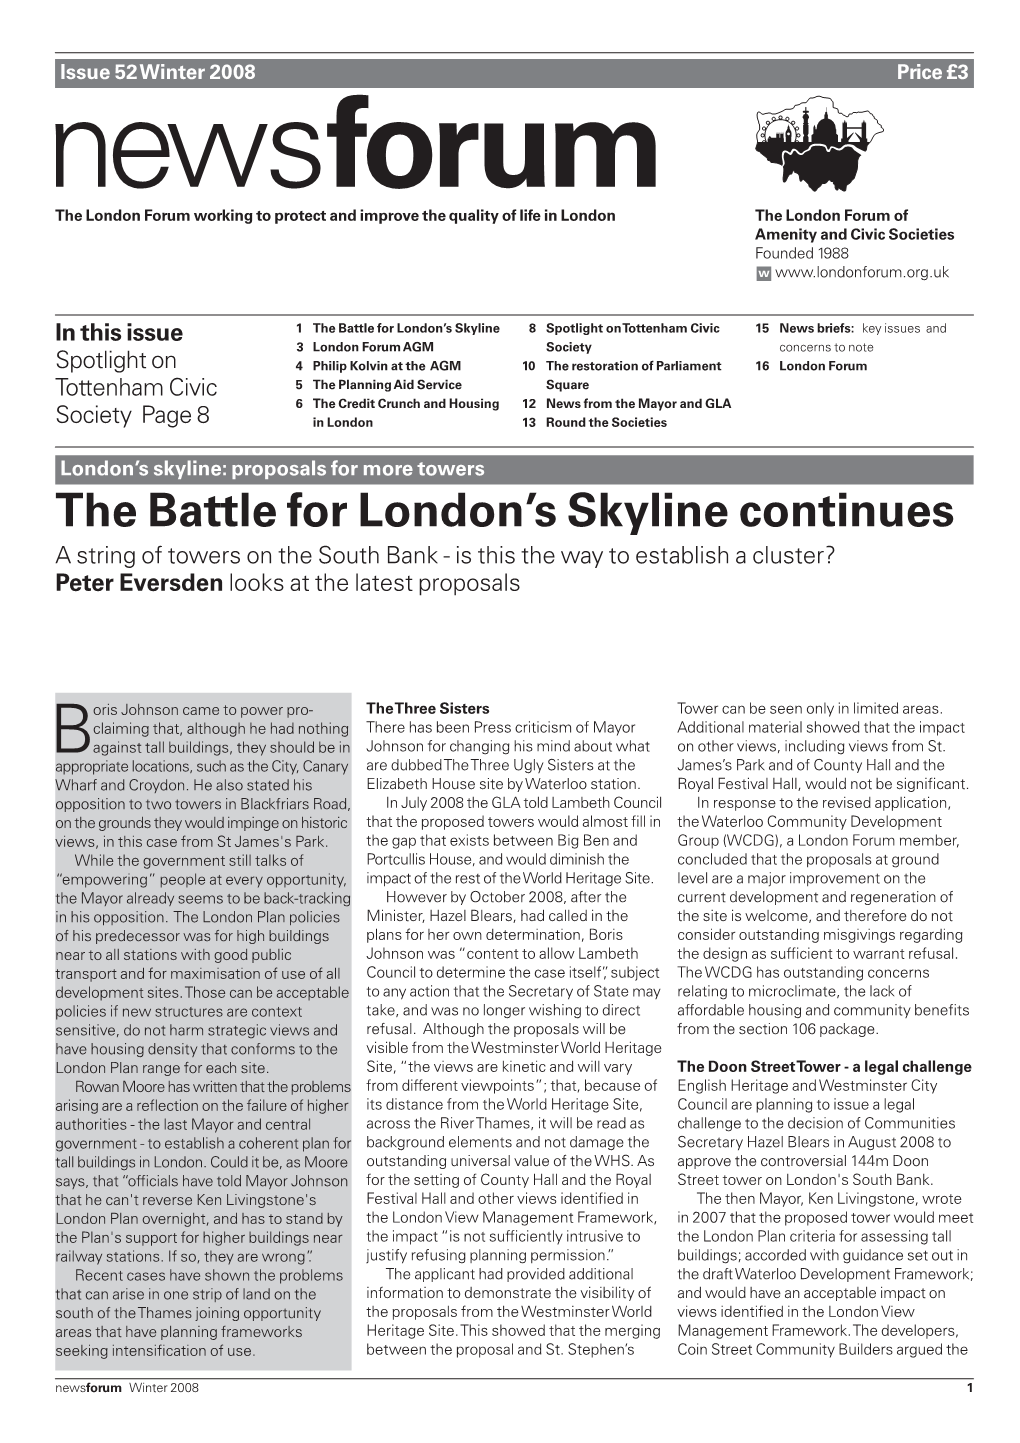 The Battle for London's Skyline Continues